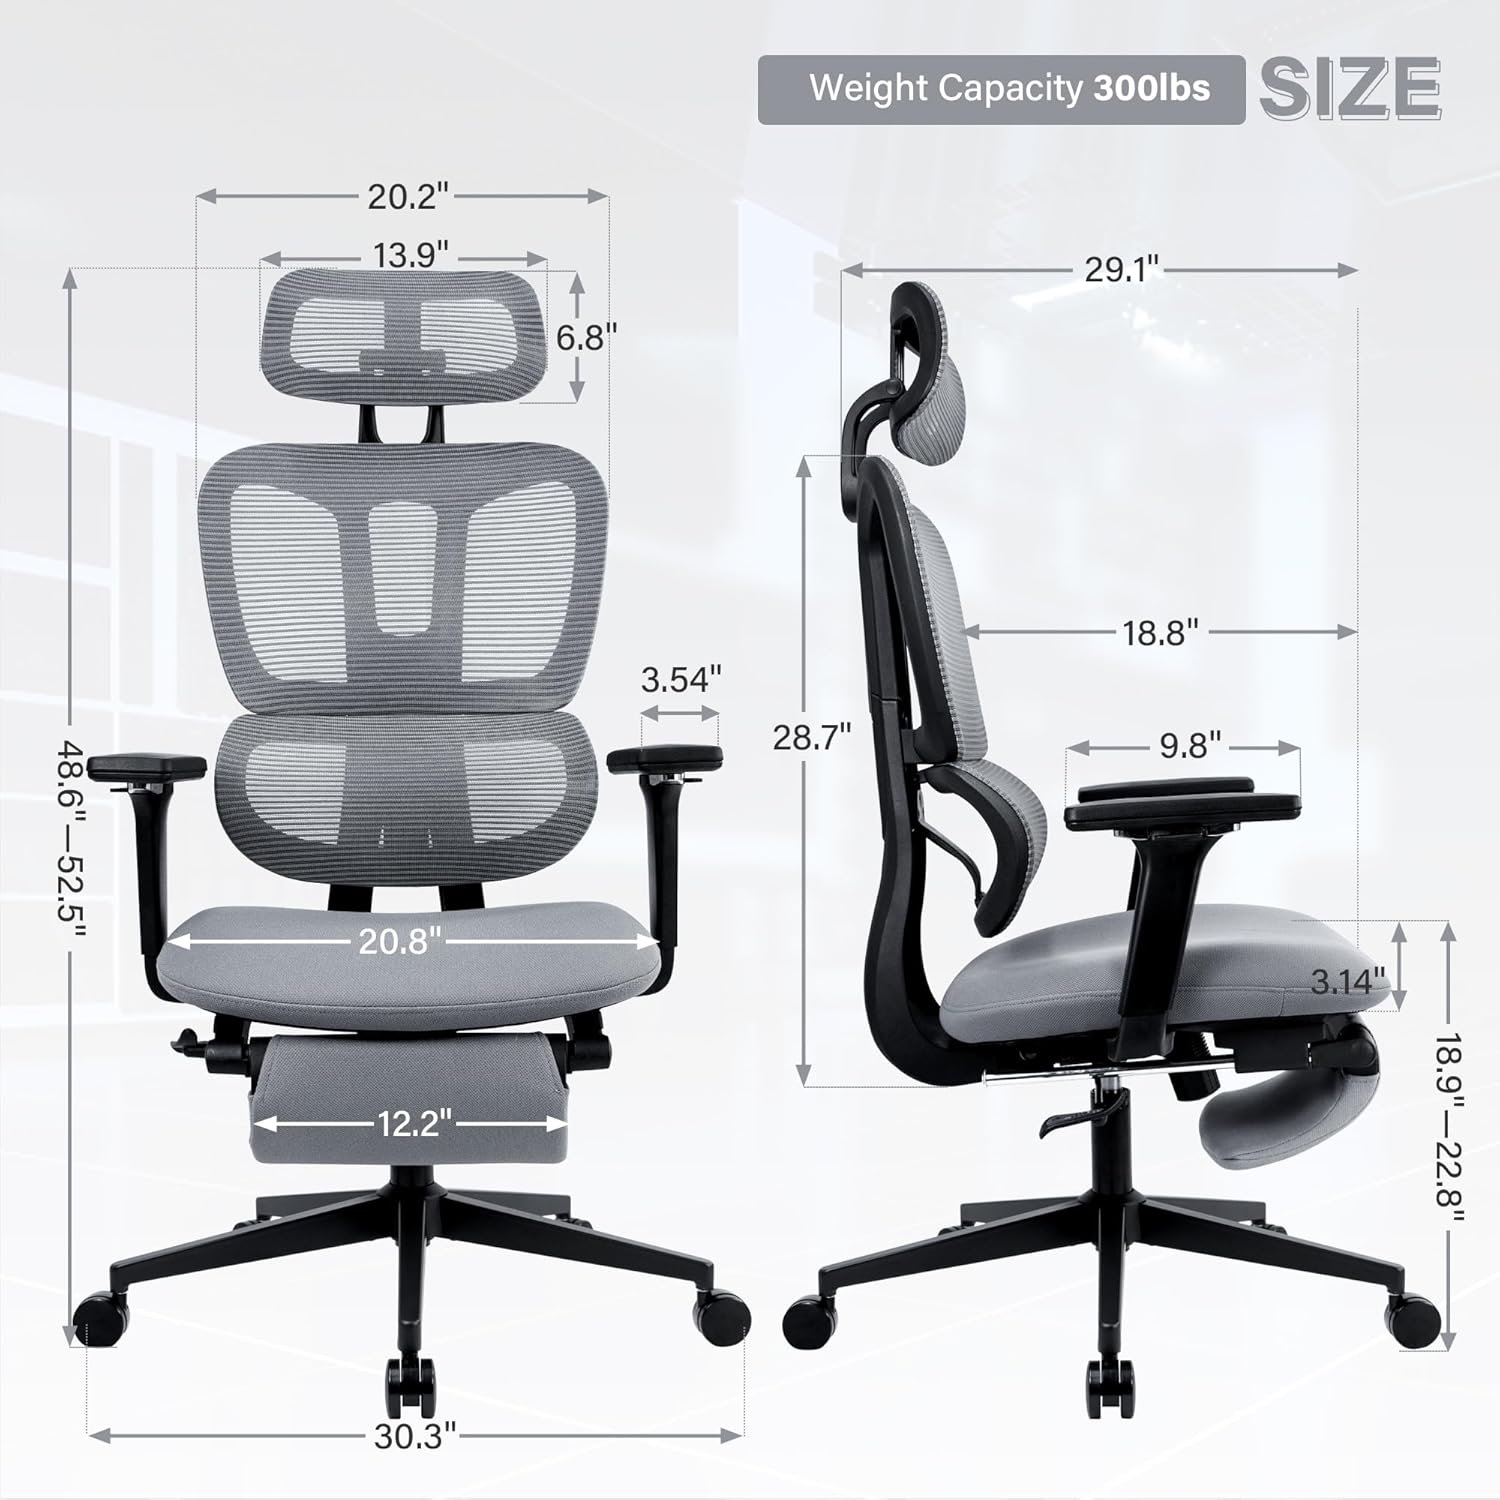 Ergonomic Mesh Office Chair with Retractable Footrest - High Back Computer Chair, Lumbar Support, Adjustable Armrest and Headrest, Durable Base - Multifunctional Home Office Desk Chair for Adults